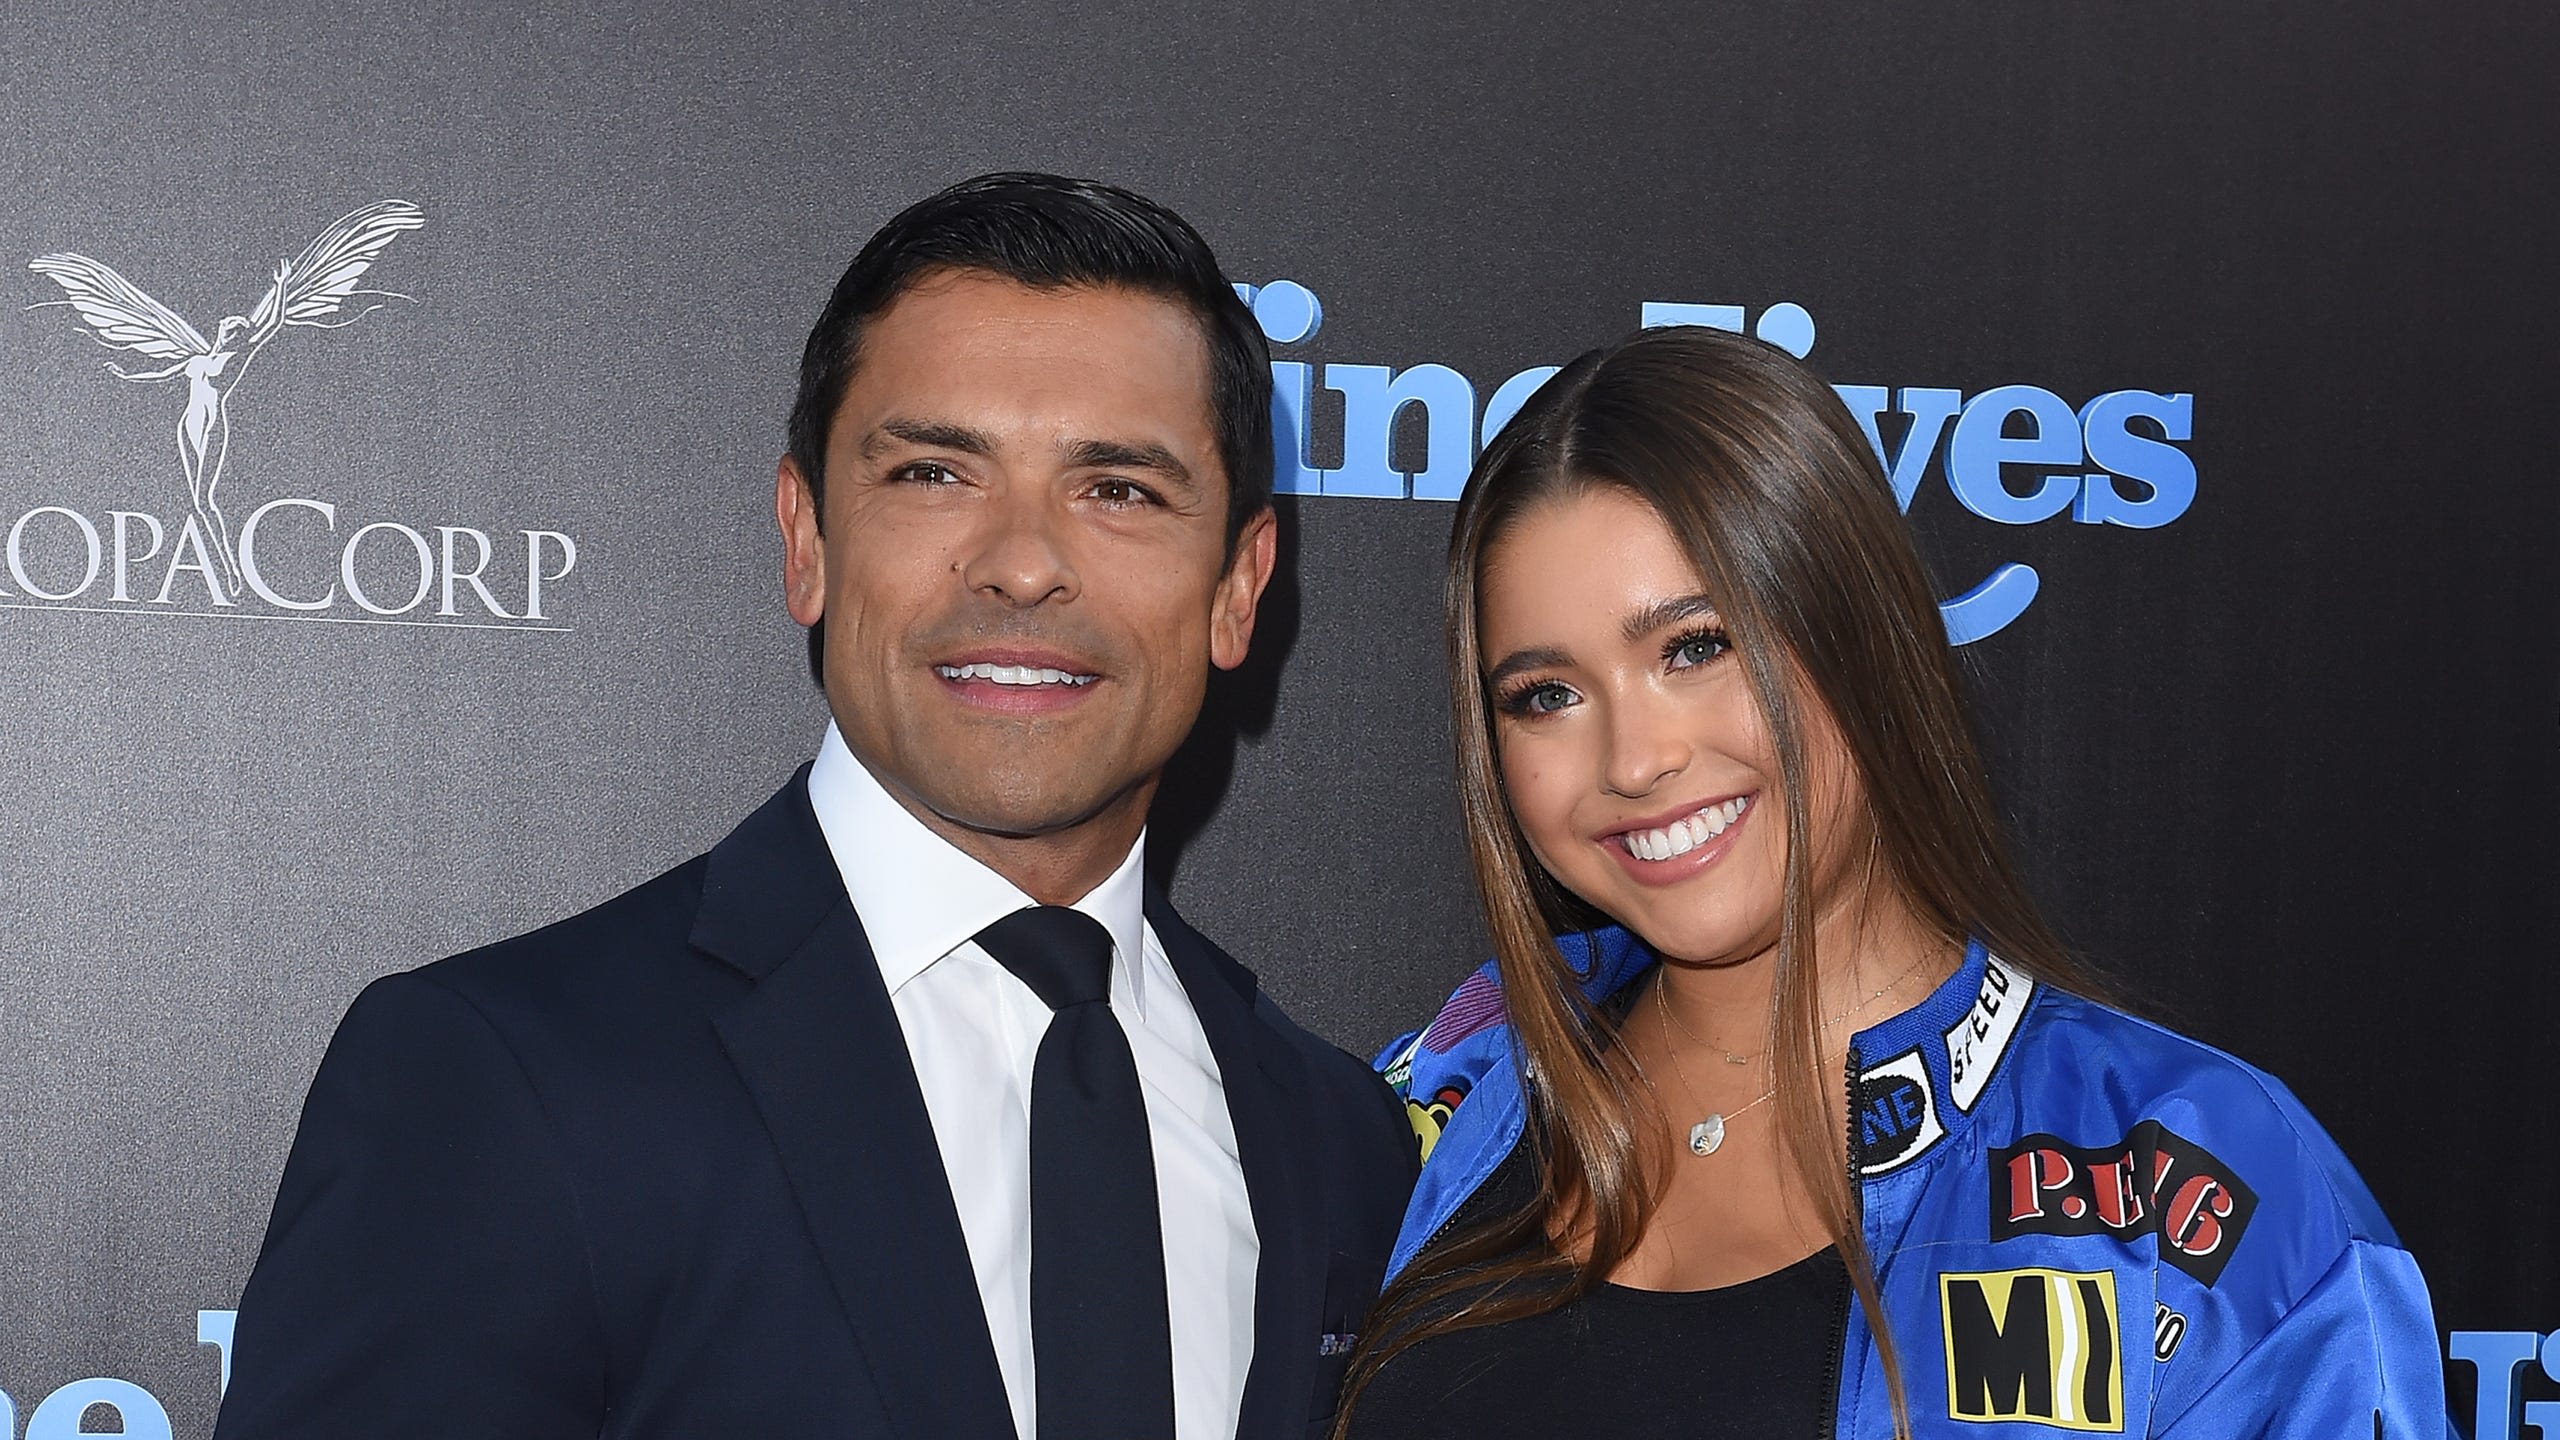 Mark Consuelos Has Thoughts After His Daughter Announces Major Career News